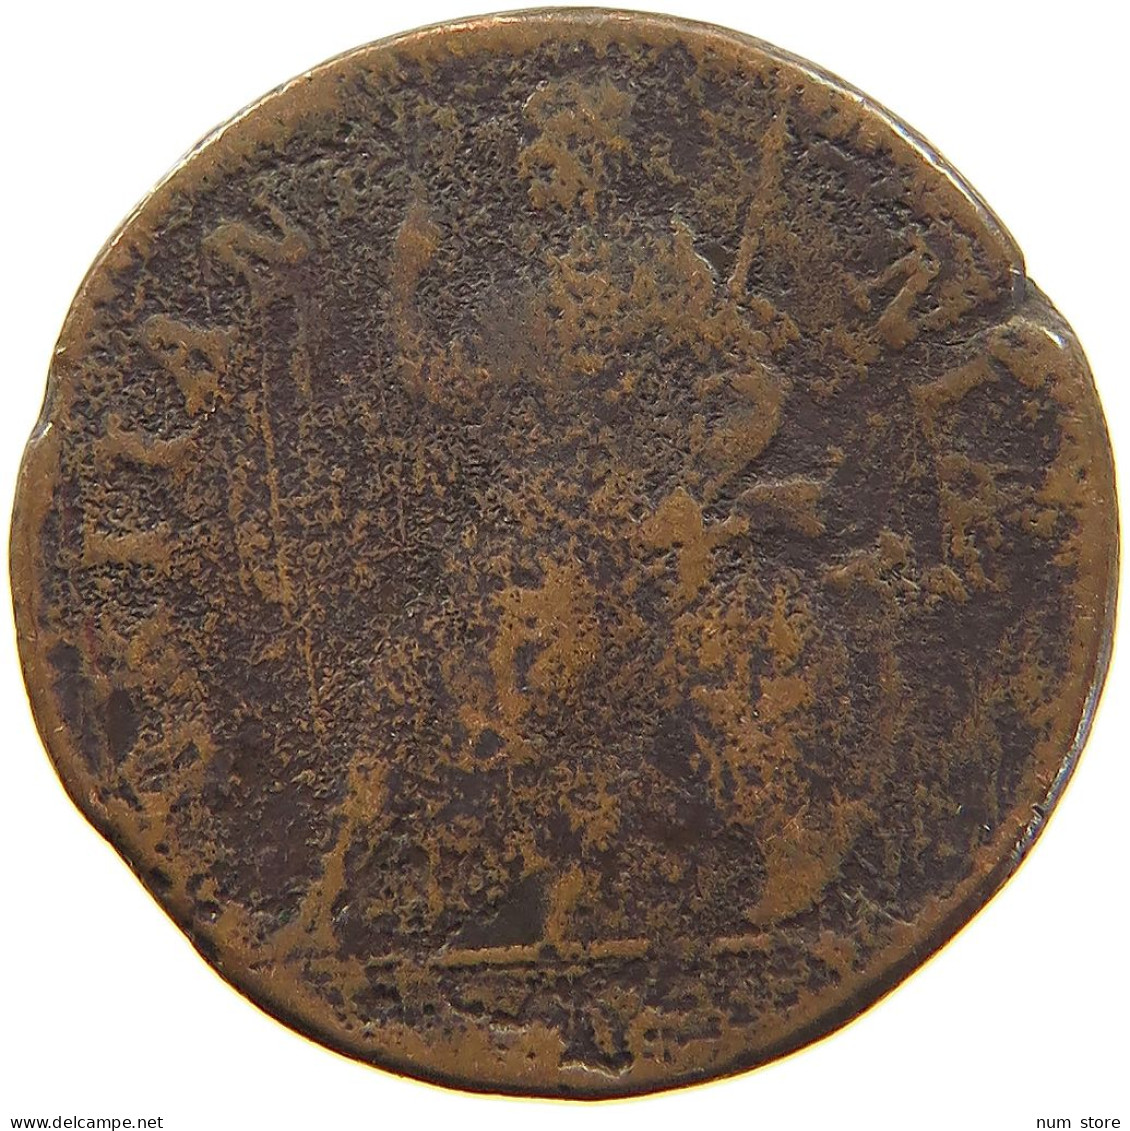 GREAT BRITAIN FARTHING  CHARLES II. (1660-1685) #MA 100940 - A. 1 Farthing